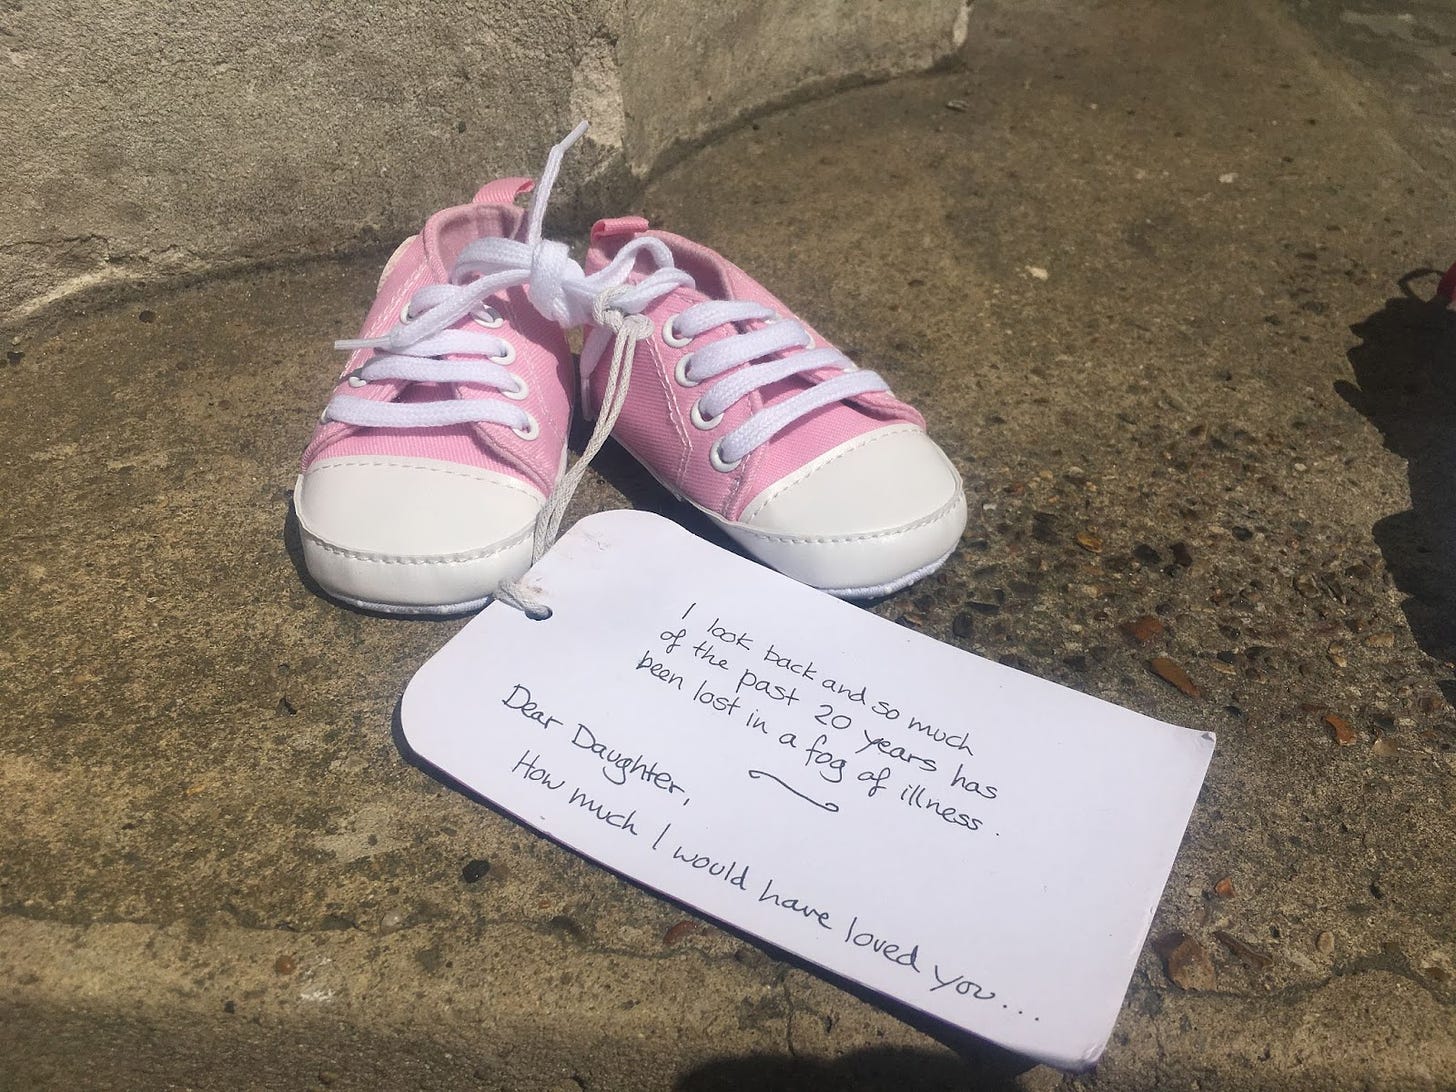 Photo from the Millions Missing action for ME/CFS in 2019. Image description: pink, baby-sized Converse trainers with a handwritten tag that reads: “I look back and so much of the past 20 years has been lost in a fog of illness. Dear Daughter, how much I would have loved you…”.